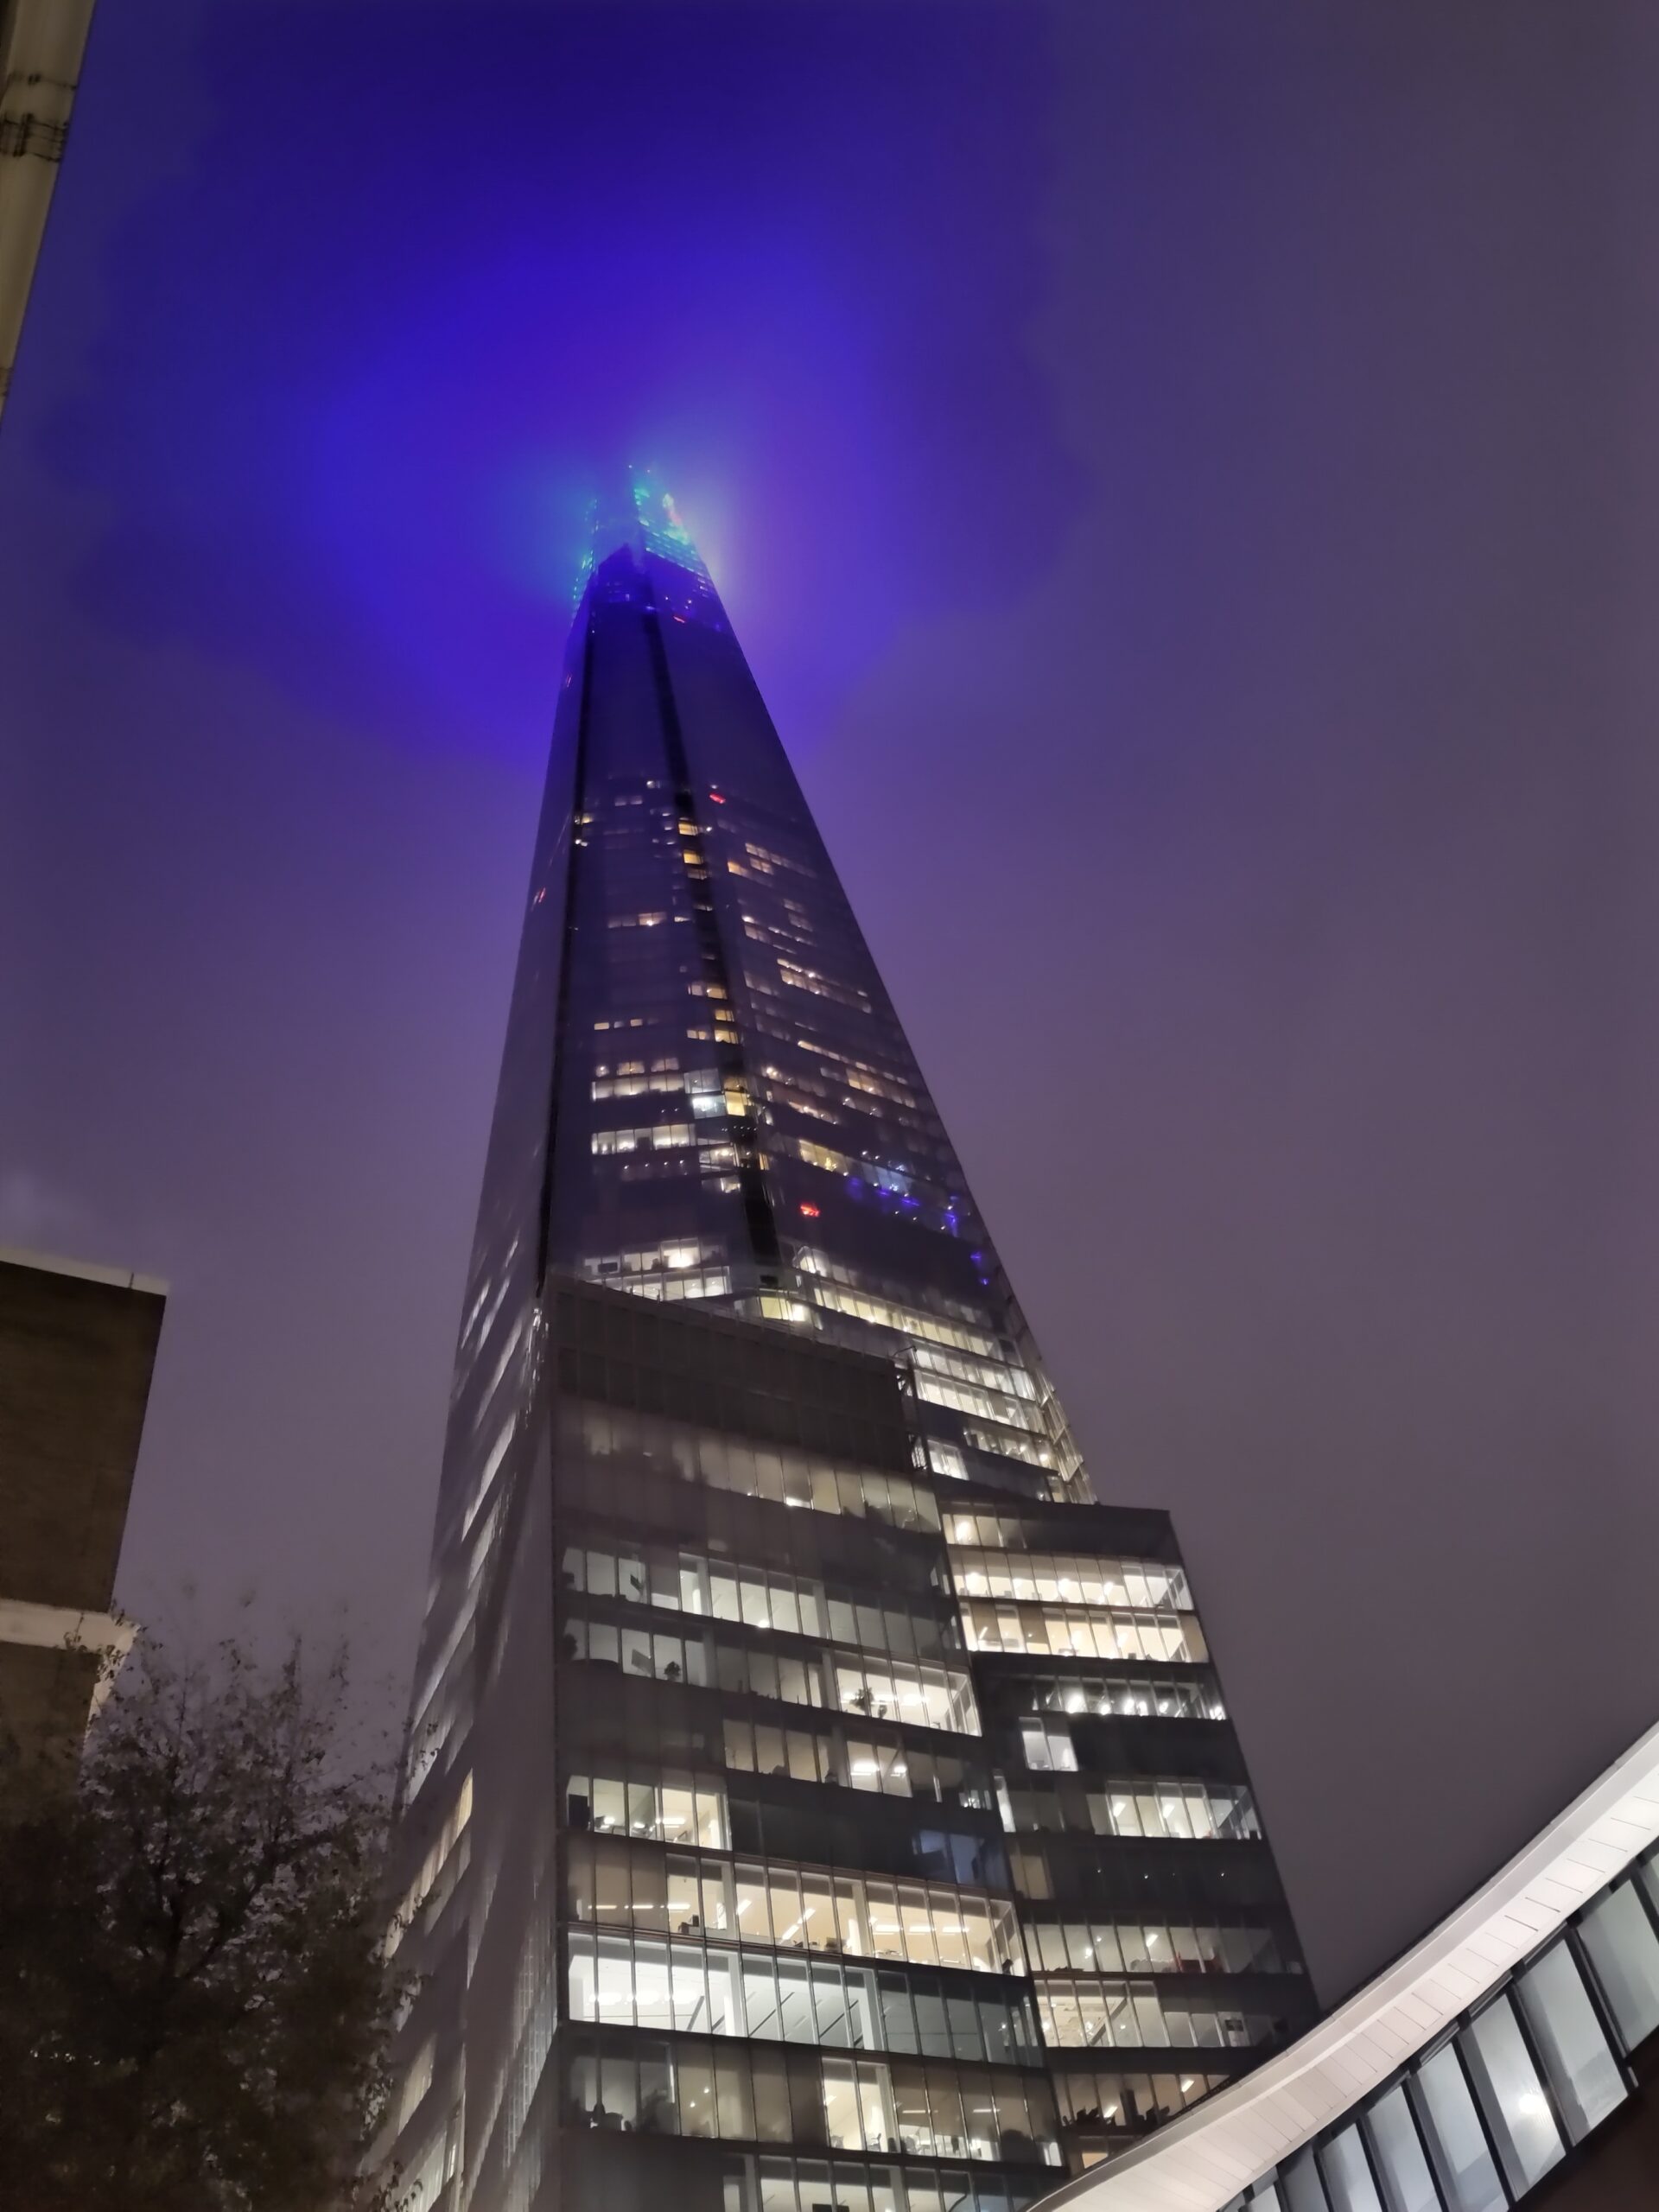 A photograph of the Shard skyscraper in London Bridge against a wintry night sky. The purple lights on the top floors spread like an apocalypse from the tower's spiky heights.